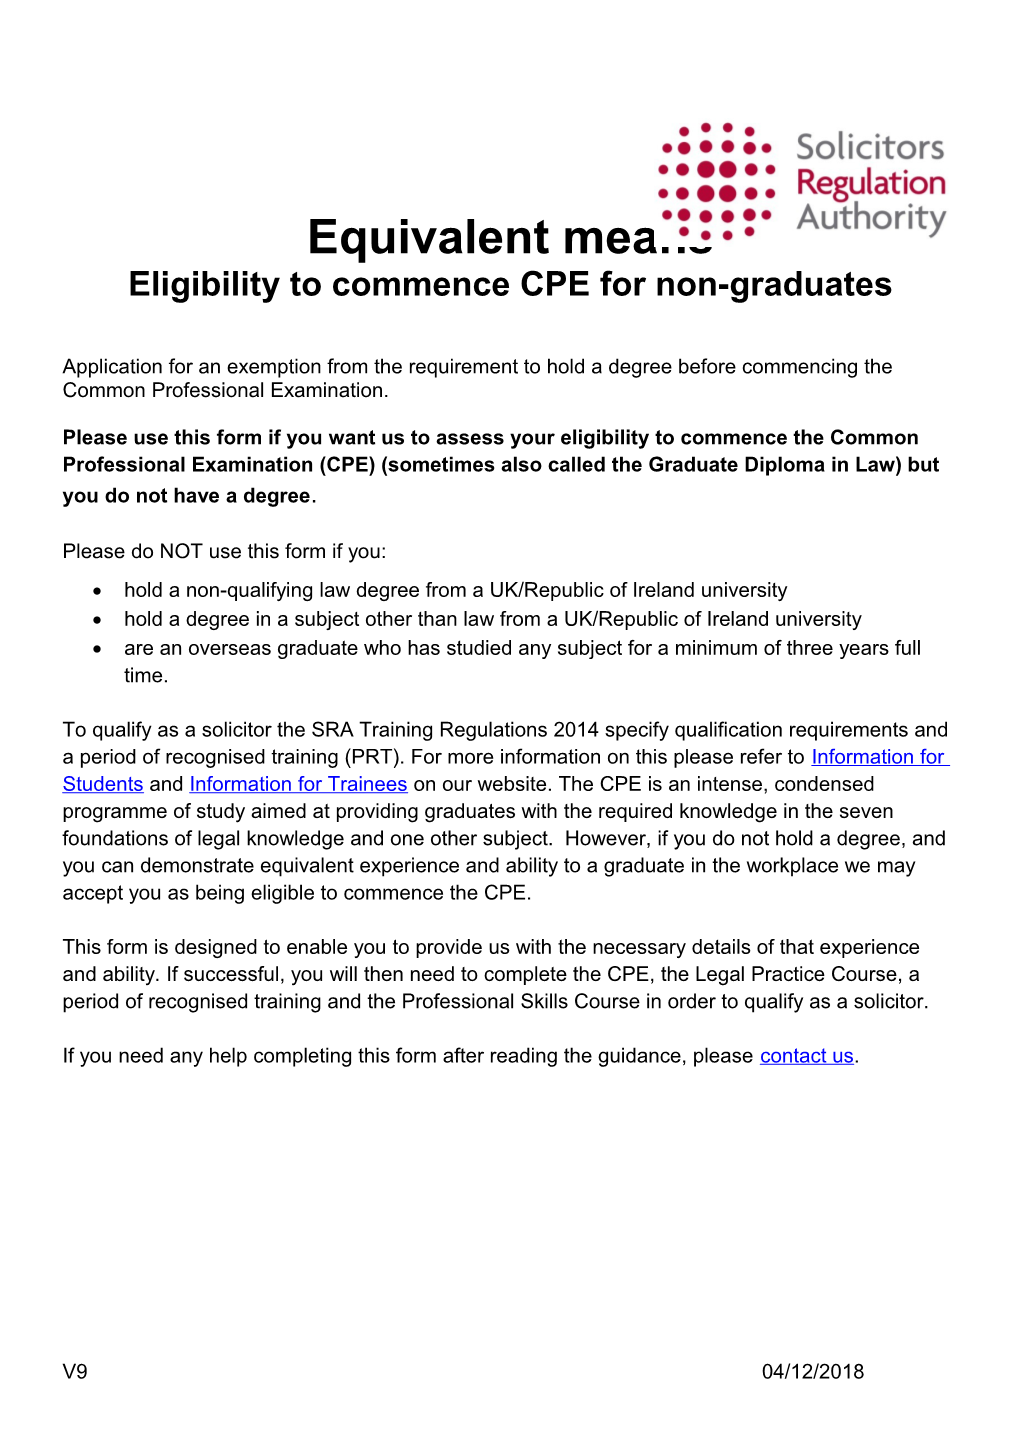 Equivalent Means - Eligibility to Commence CPE for Non-Graduates